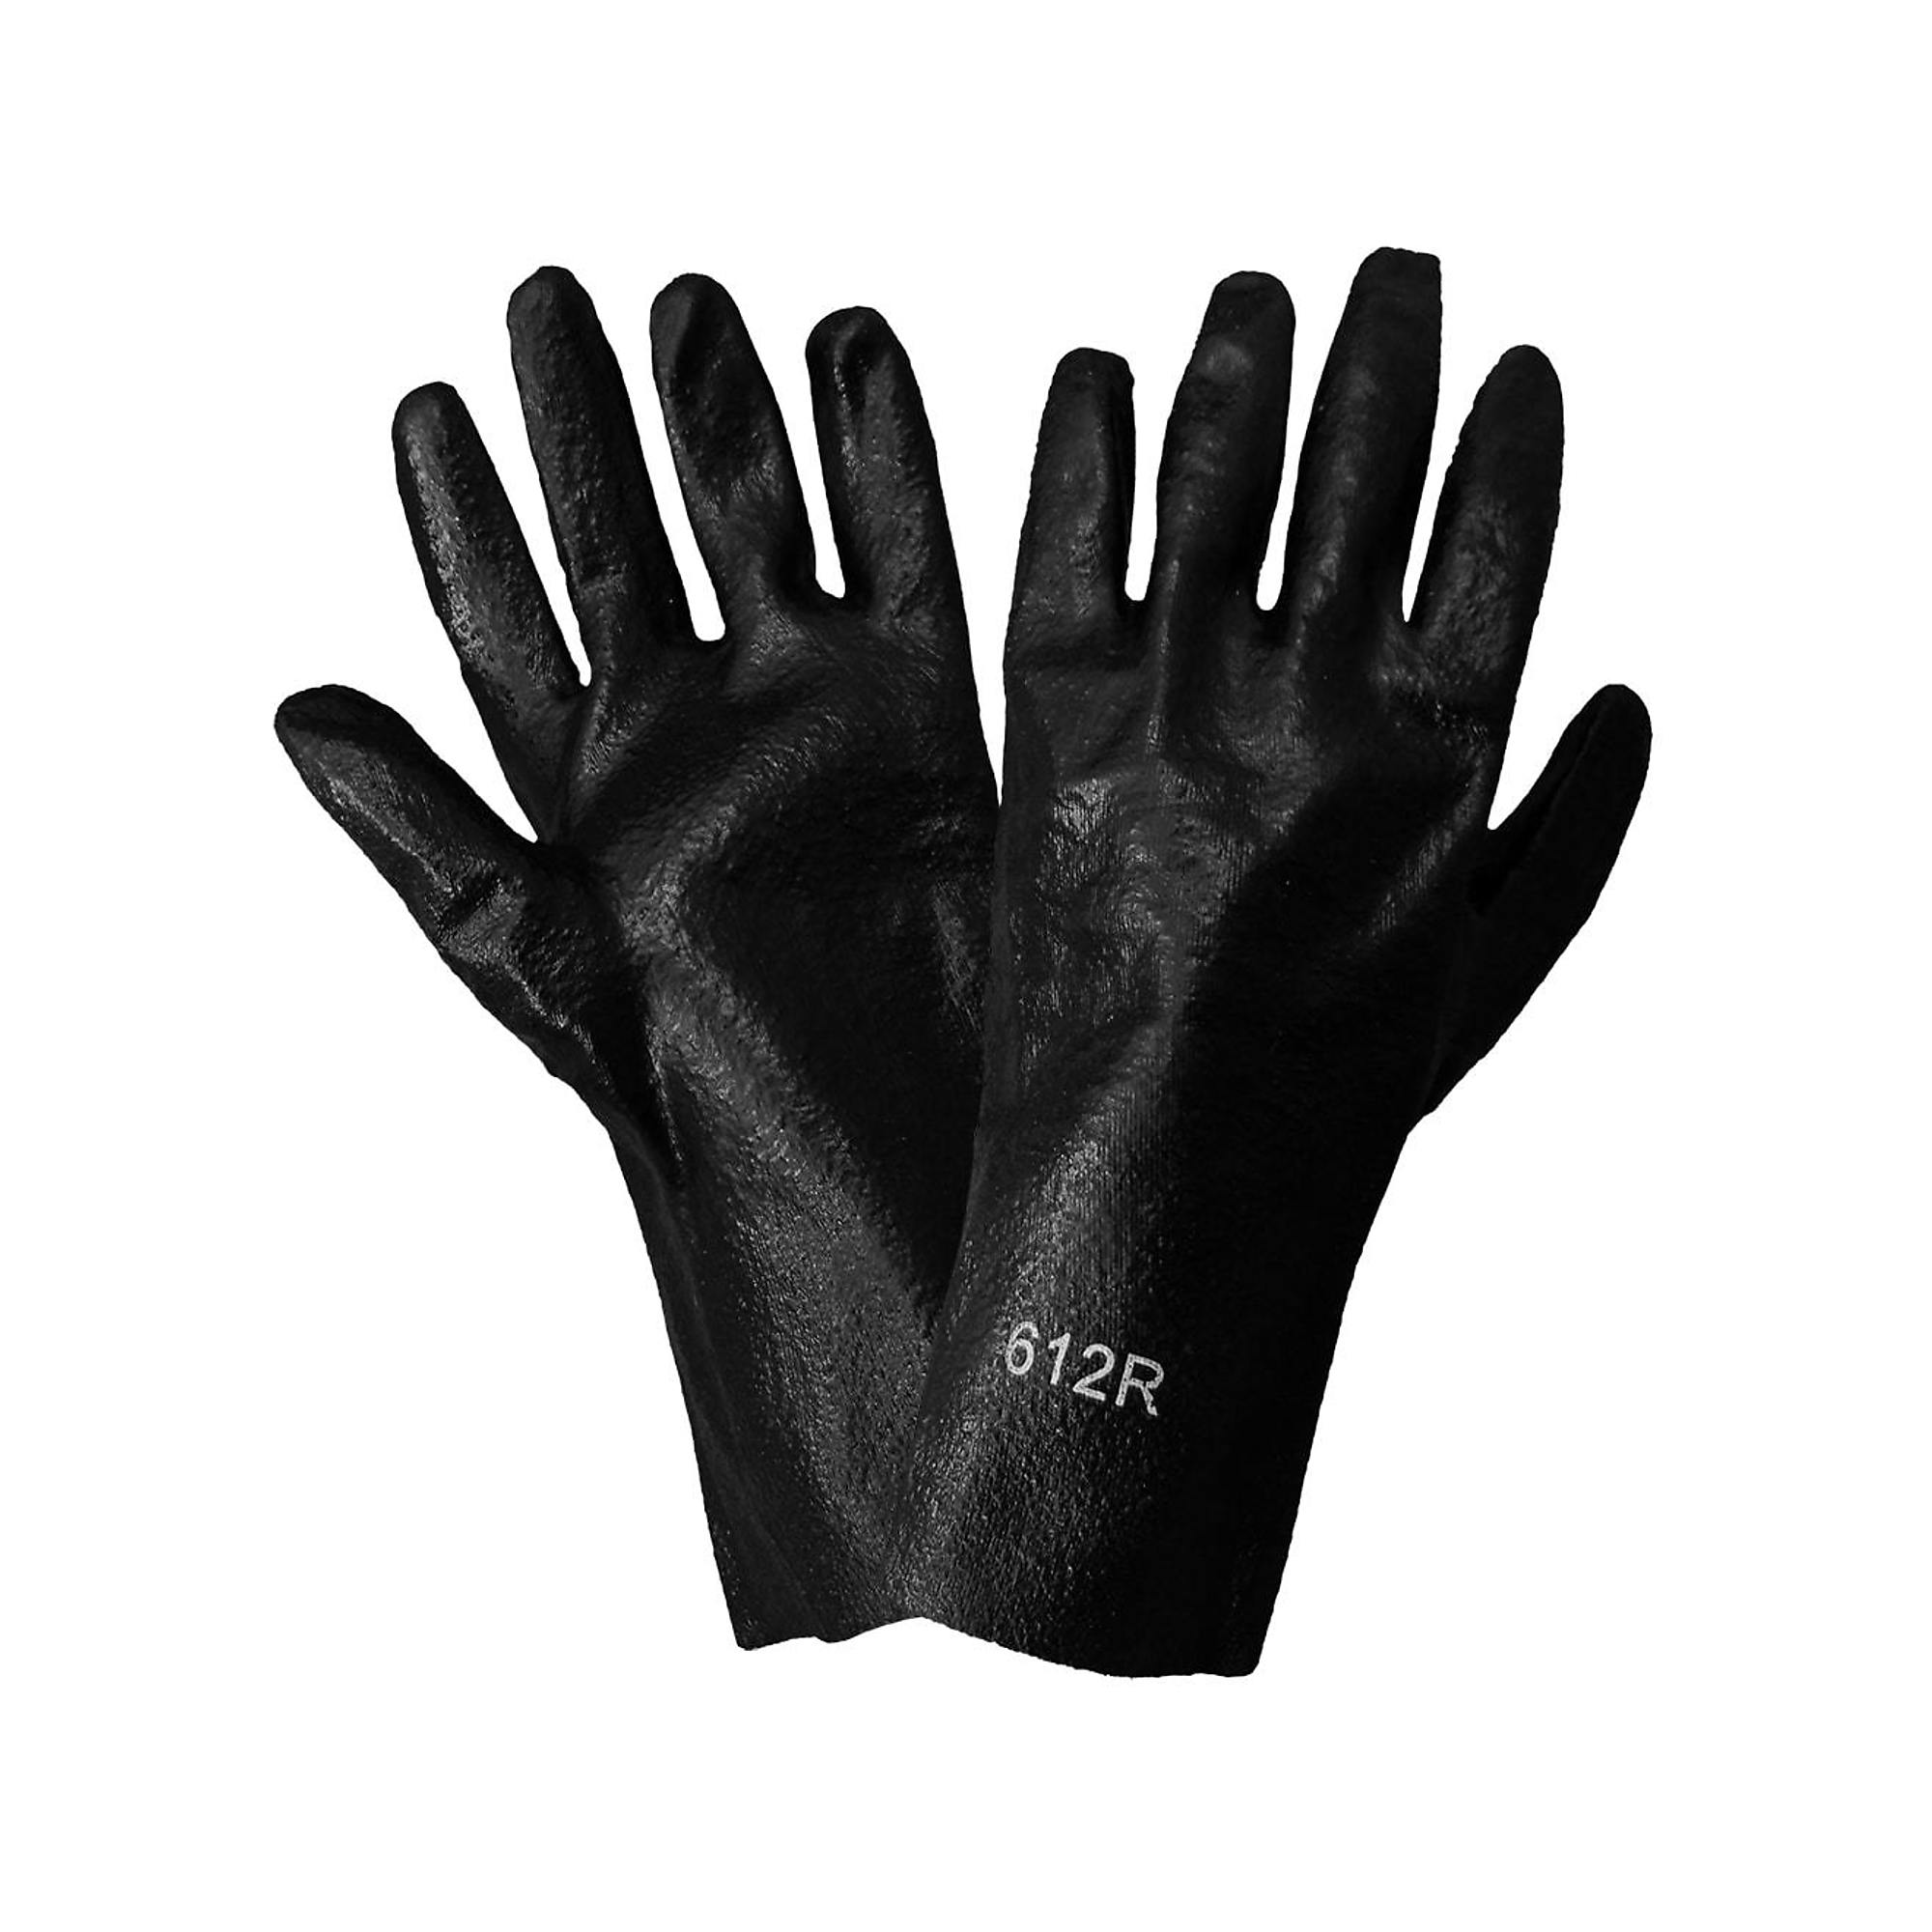 Global Glove, Black, 12Inch PVC, Cotton Liner, Solvent Gloves - 12 Pairs, Size One Size, Color Black, Included (qty.) 12 Model 612R